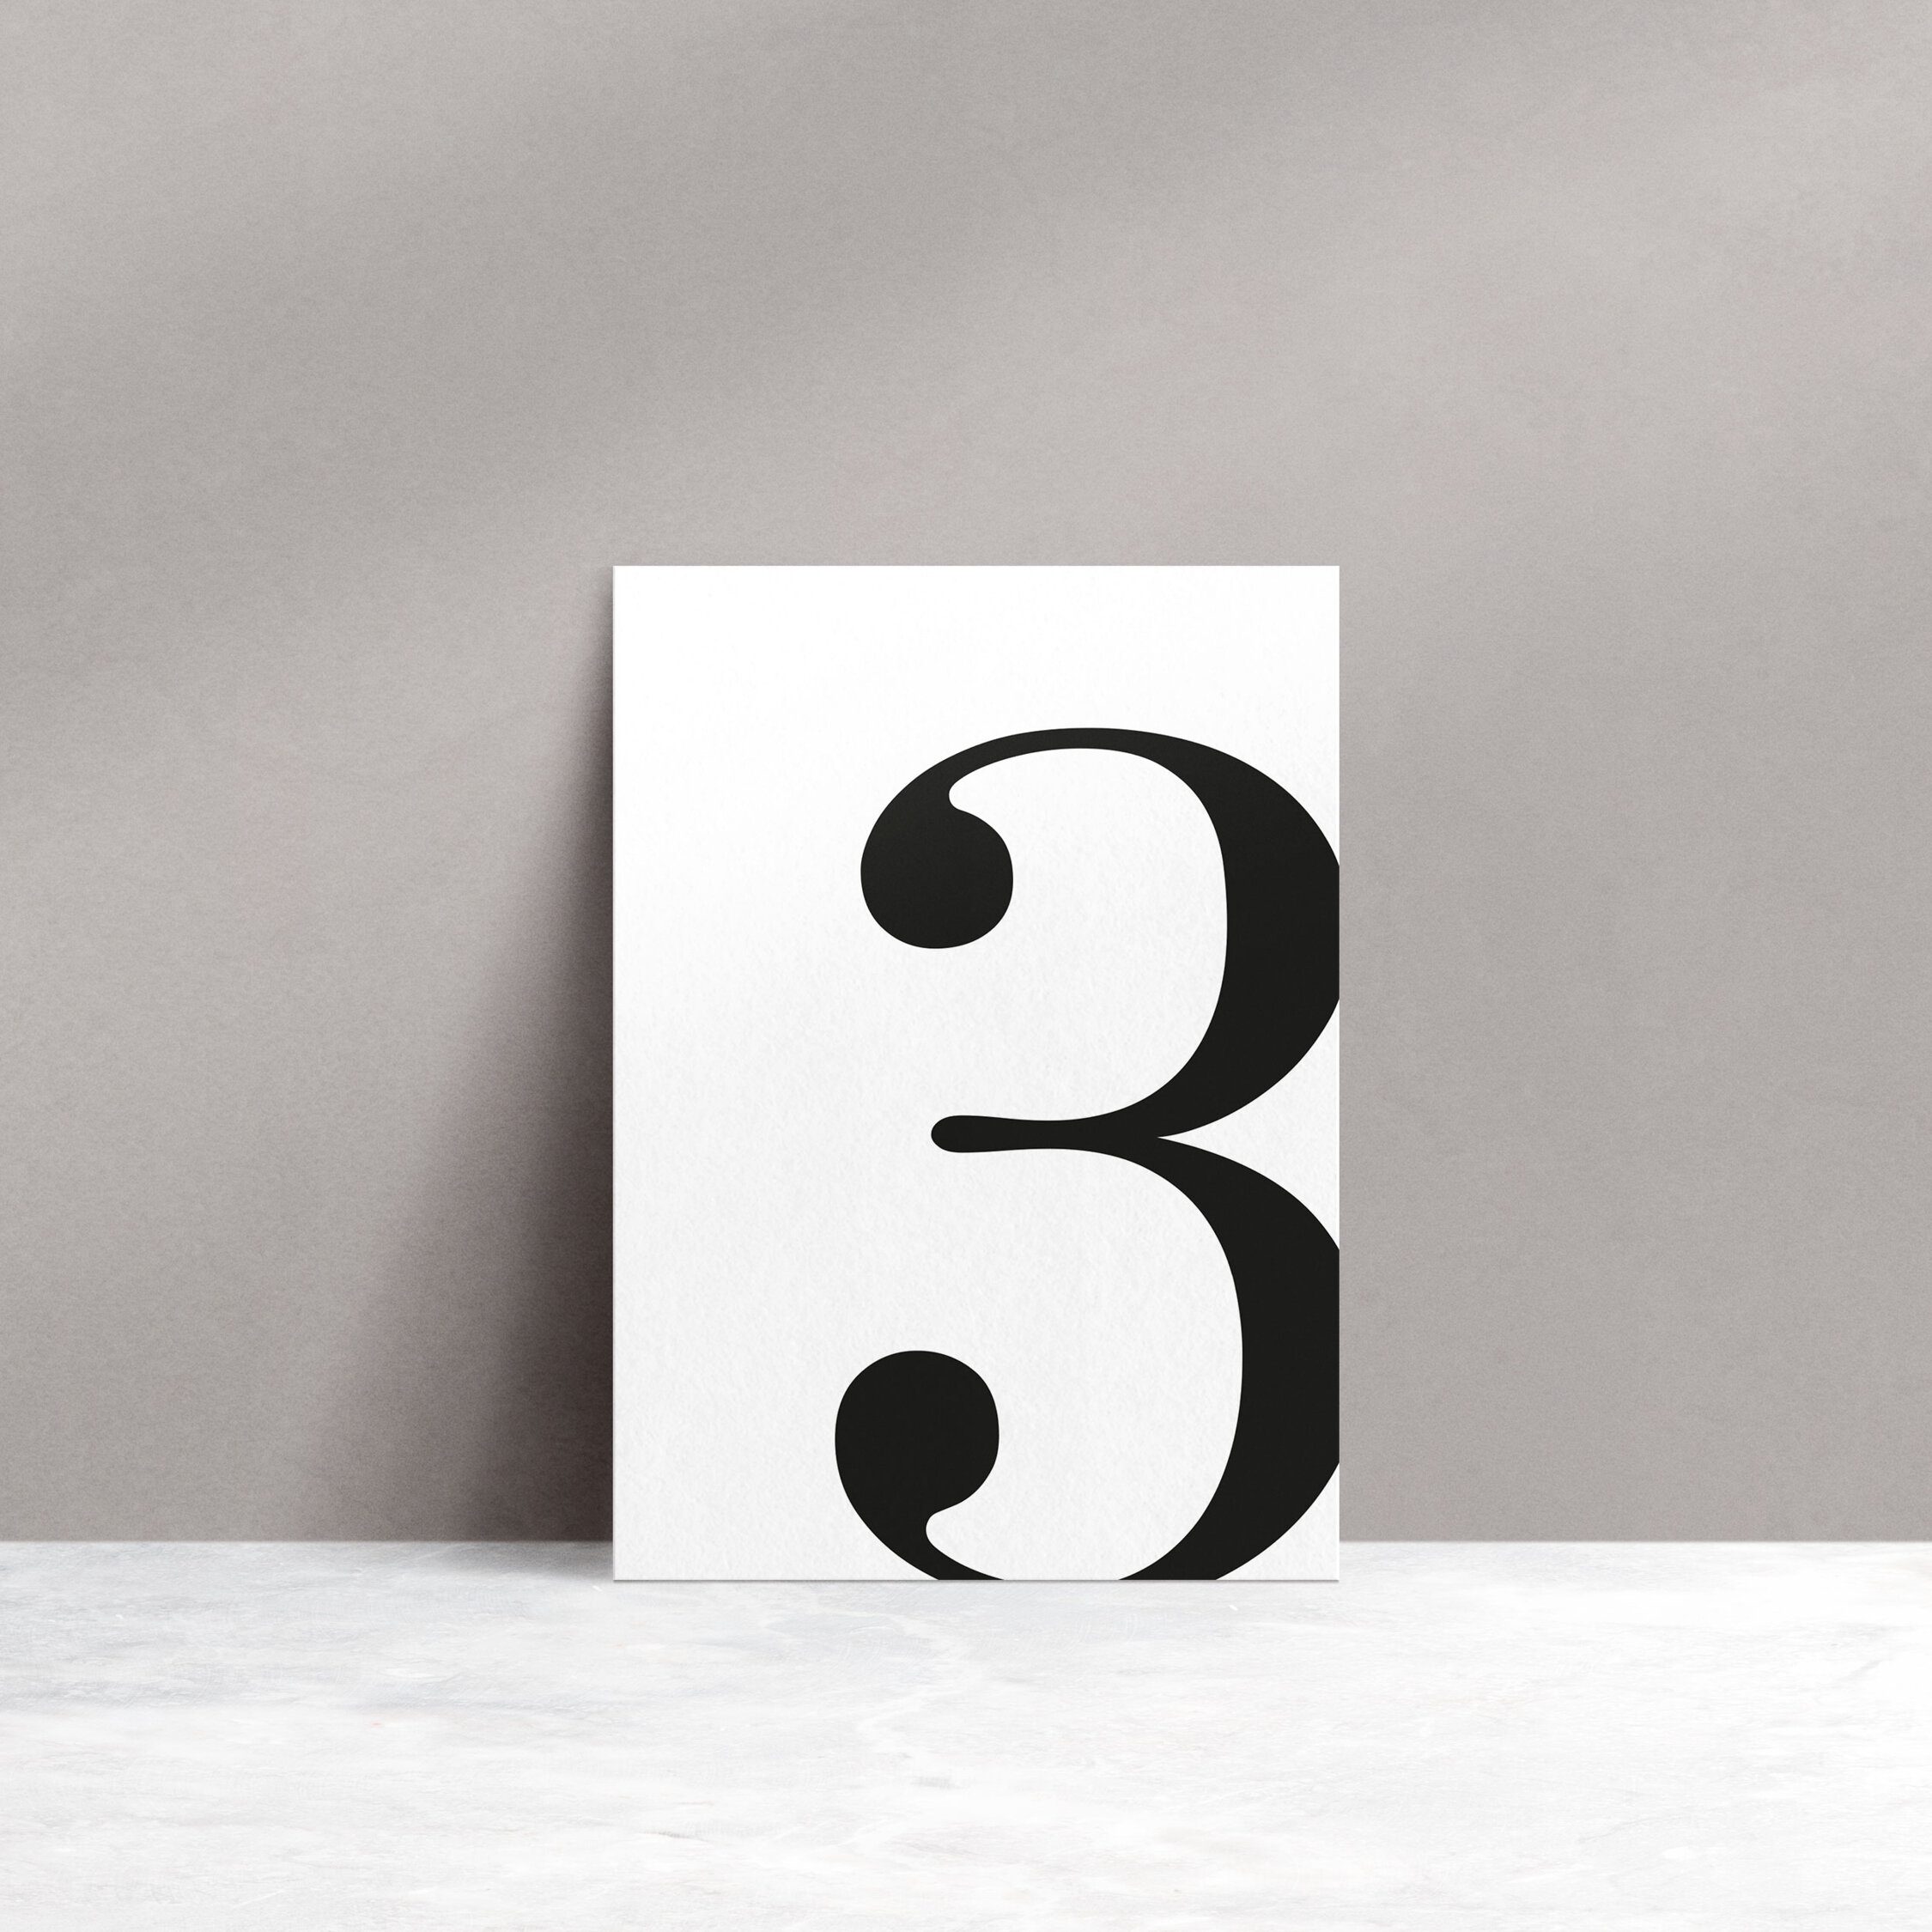 TABLE NUMBER